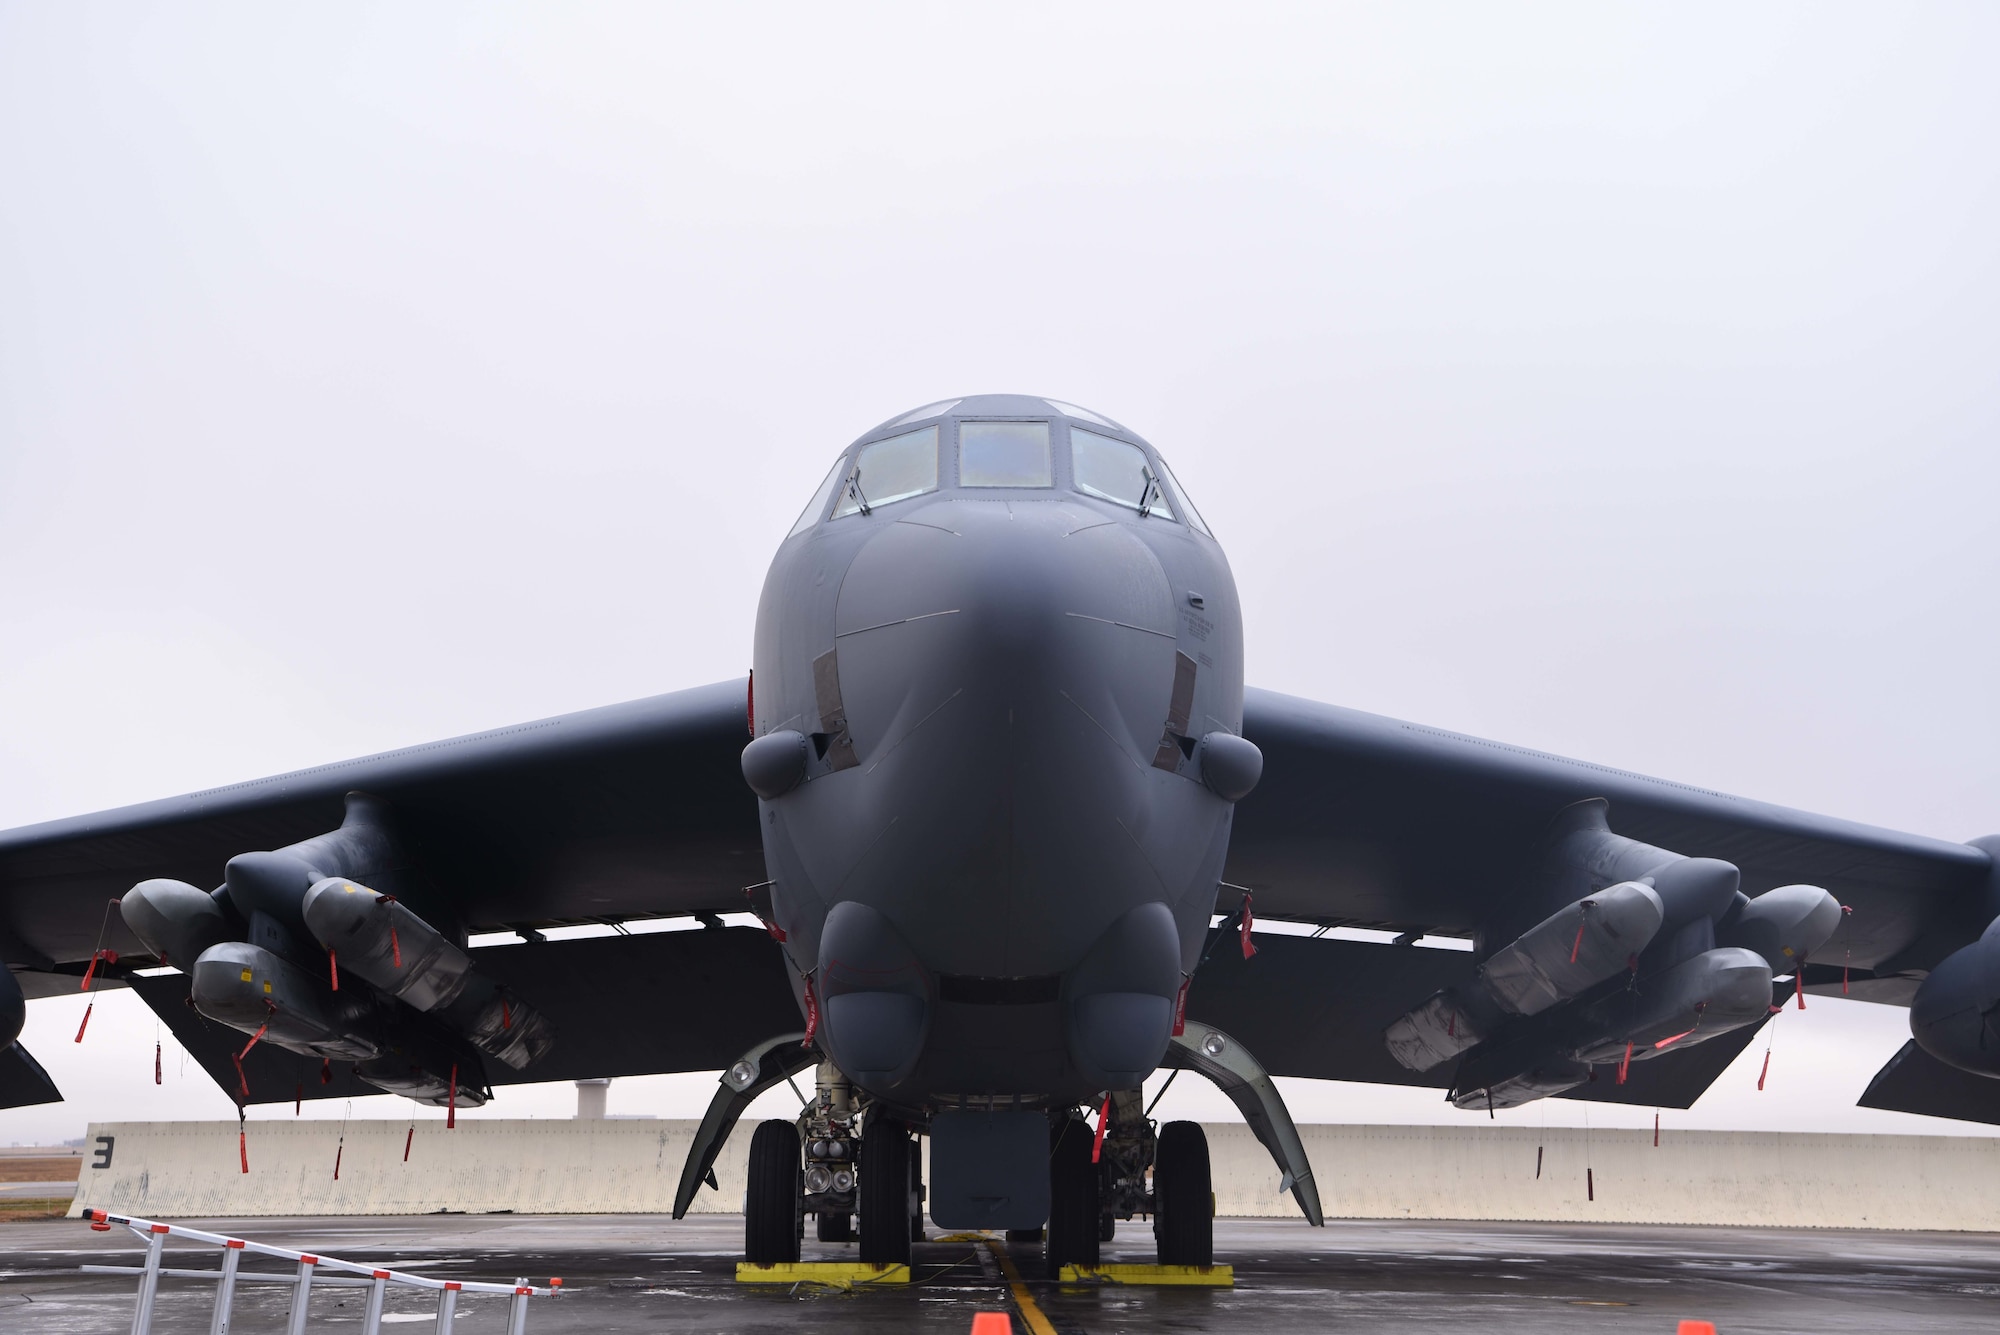 A B-52H Stratofortress sits ready on the flightline during Global Thunder 19 at Minot Air Force Base, N.D., Nov. 1, 2018. Global Thunder is a globally integrated exercise that provides training opportunities that assess all U.S. Strategic Command (USSTRATCOM) mission areas and joint and field training operational readiness, with a specific focus on nuclear readiness. USSTRATCOM has global responsibilities assigned through the Unified Command Plan that includes strategic deterrence, nuclear operations, space operations, joint electromagnetic spectrum operations, global strike, missile defense, and analysis and targeting. (U.S. Air Force photo by Airman 1st Class Dillon J. Audit)